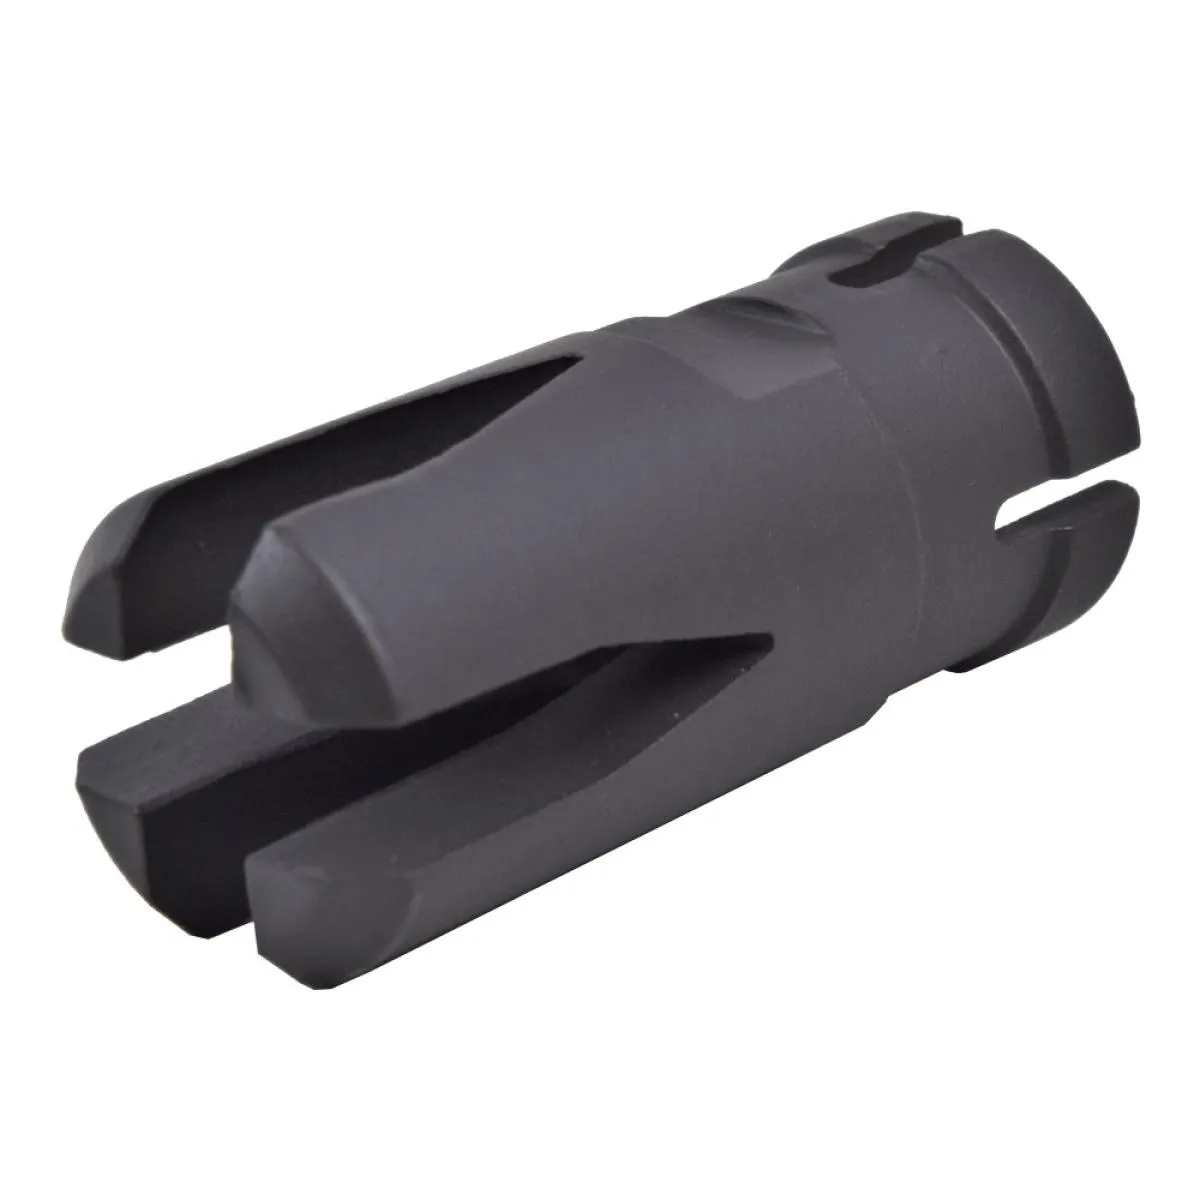 DBoys Metall Flash Hider Black suitable for G/G36 Series